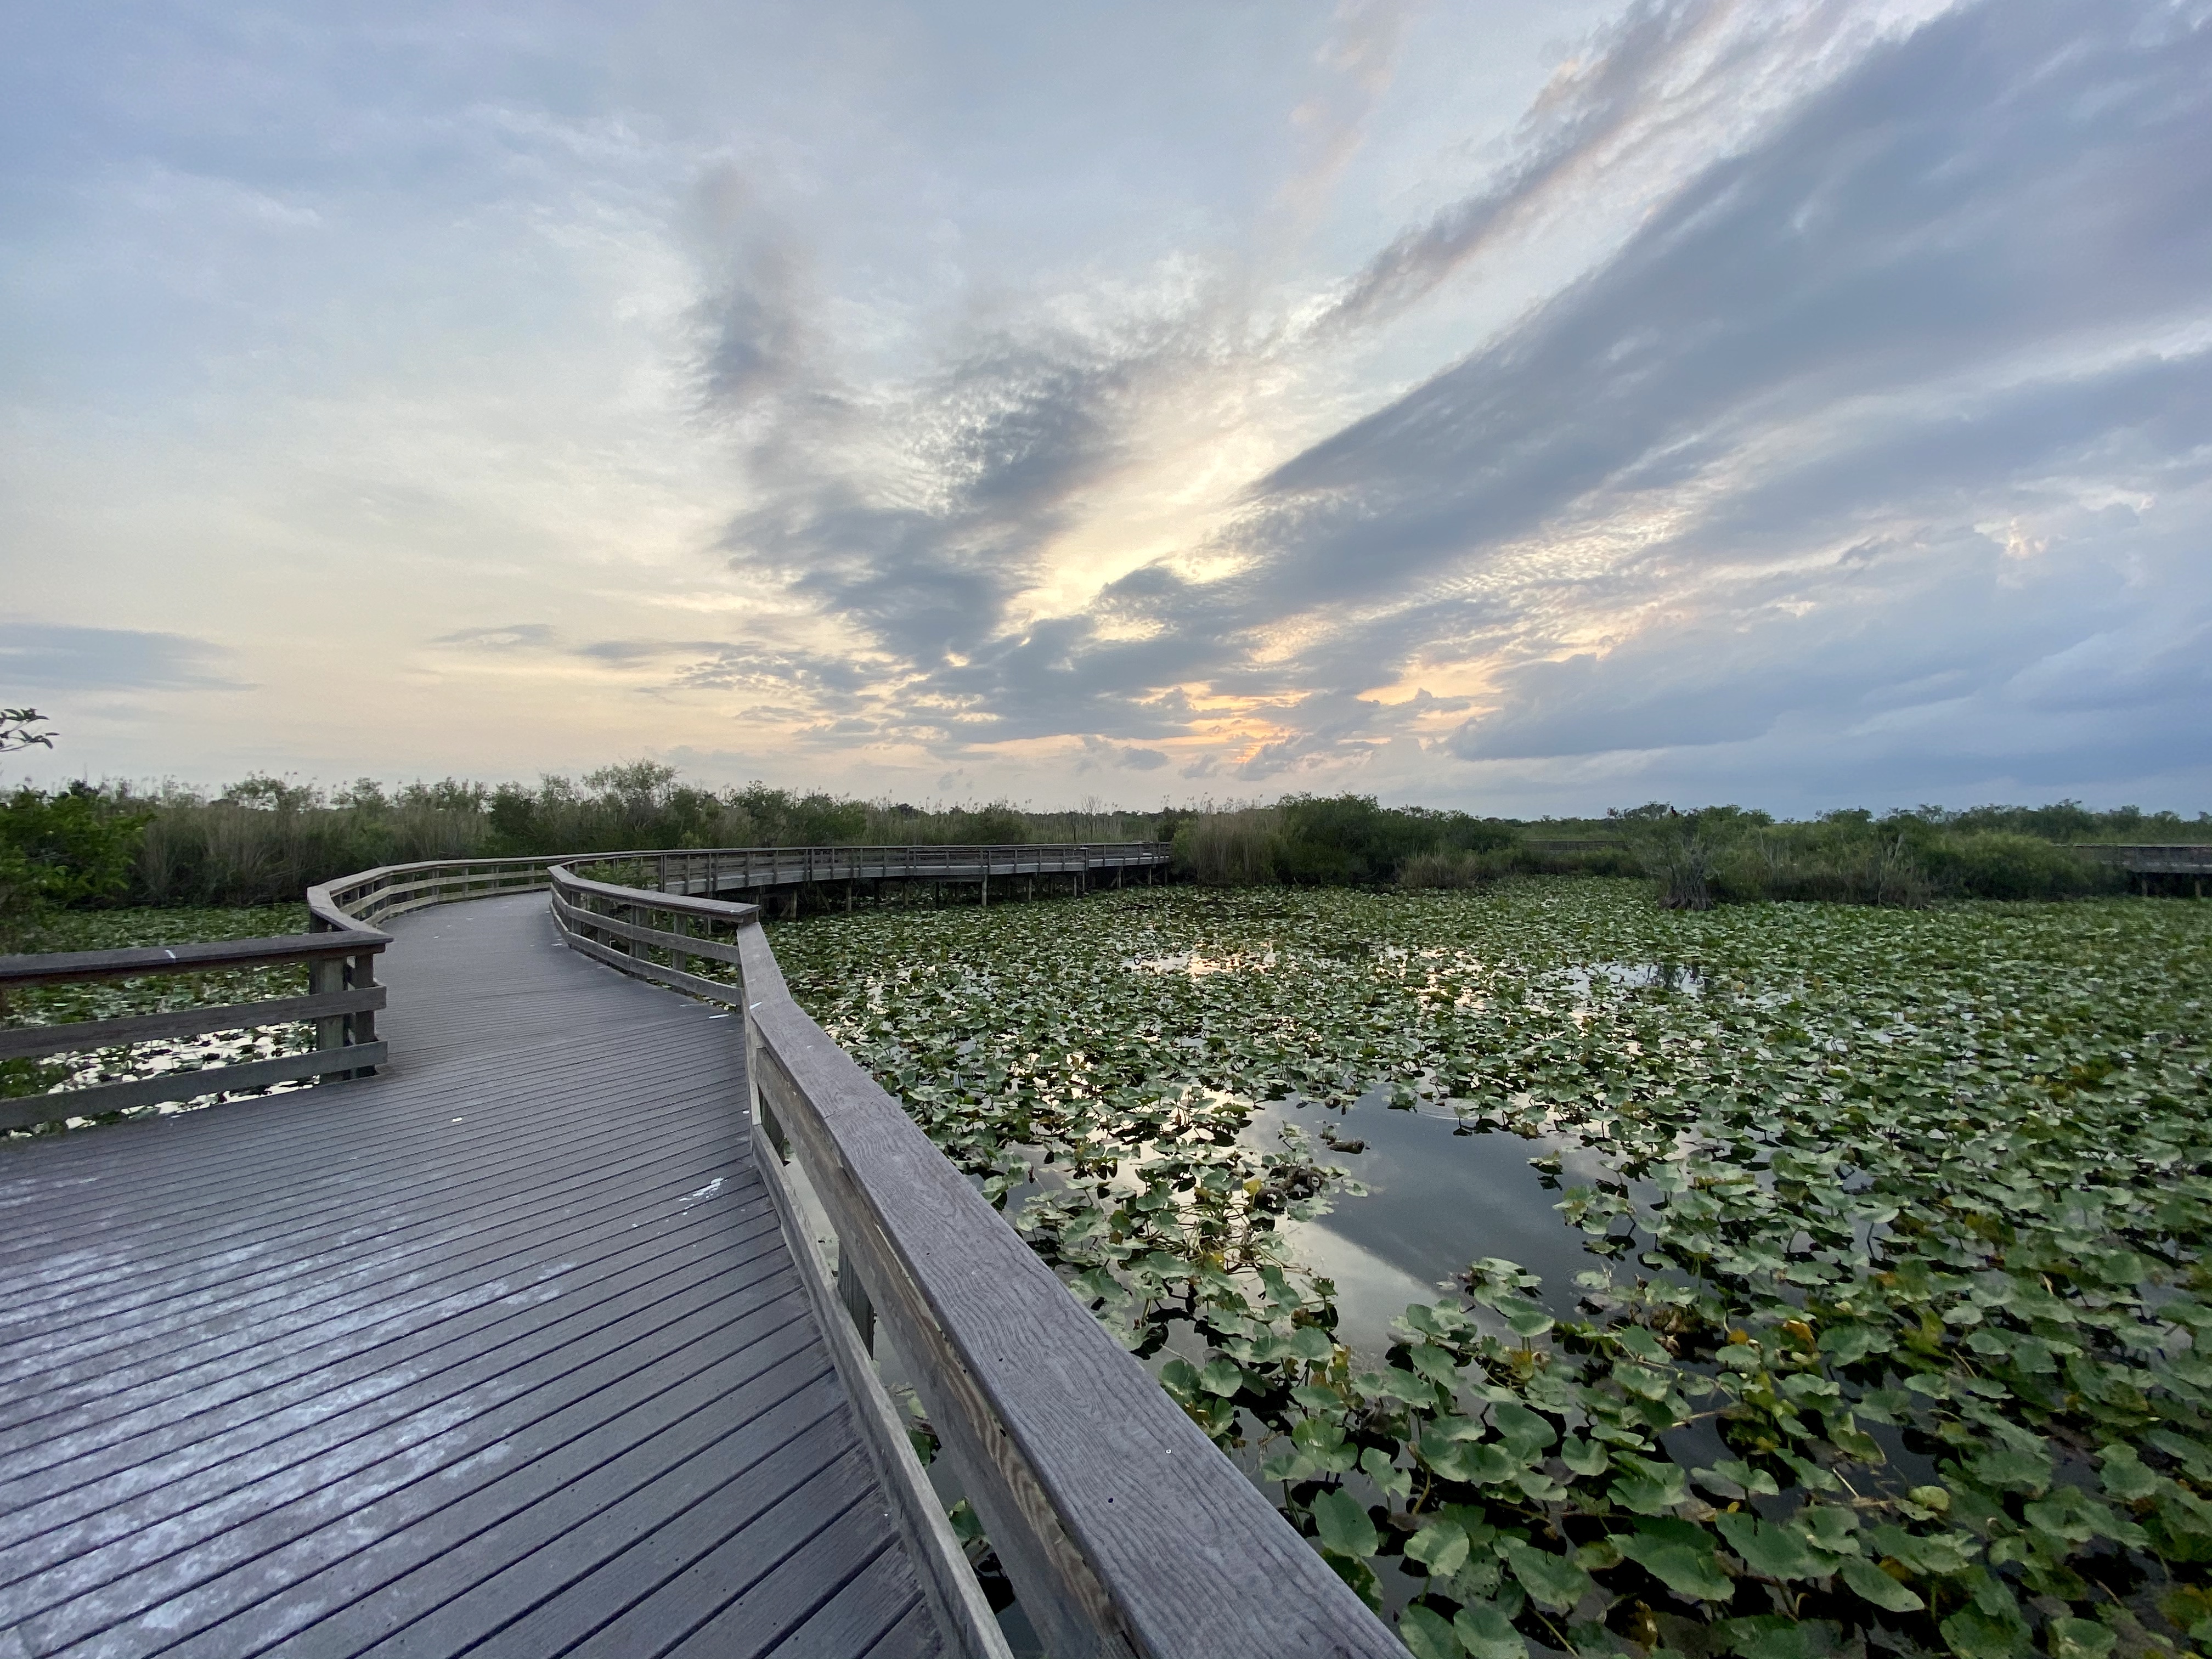 Everglades National Park increases recreational access to Homestead entrance - Everglades National Park (U.S. National Park Service)